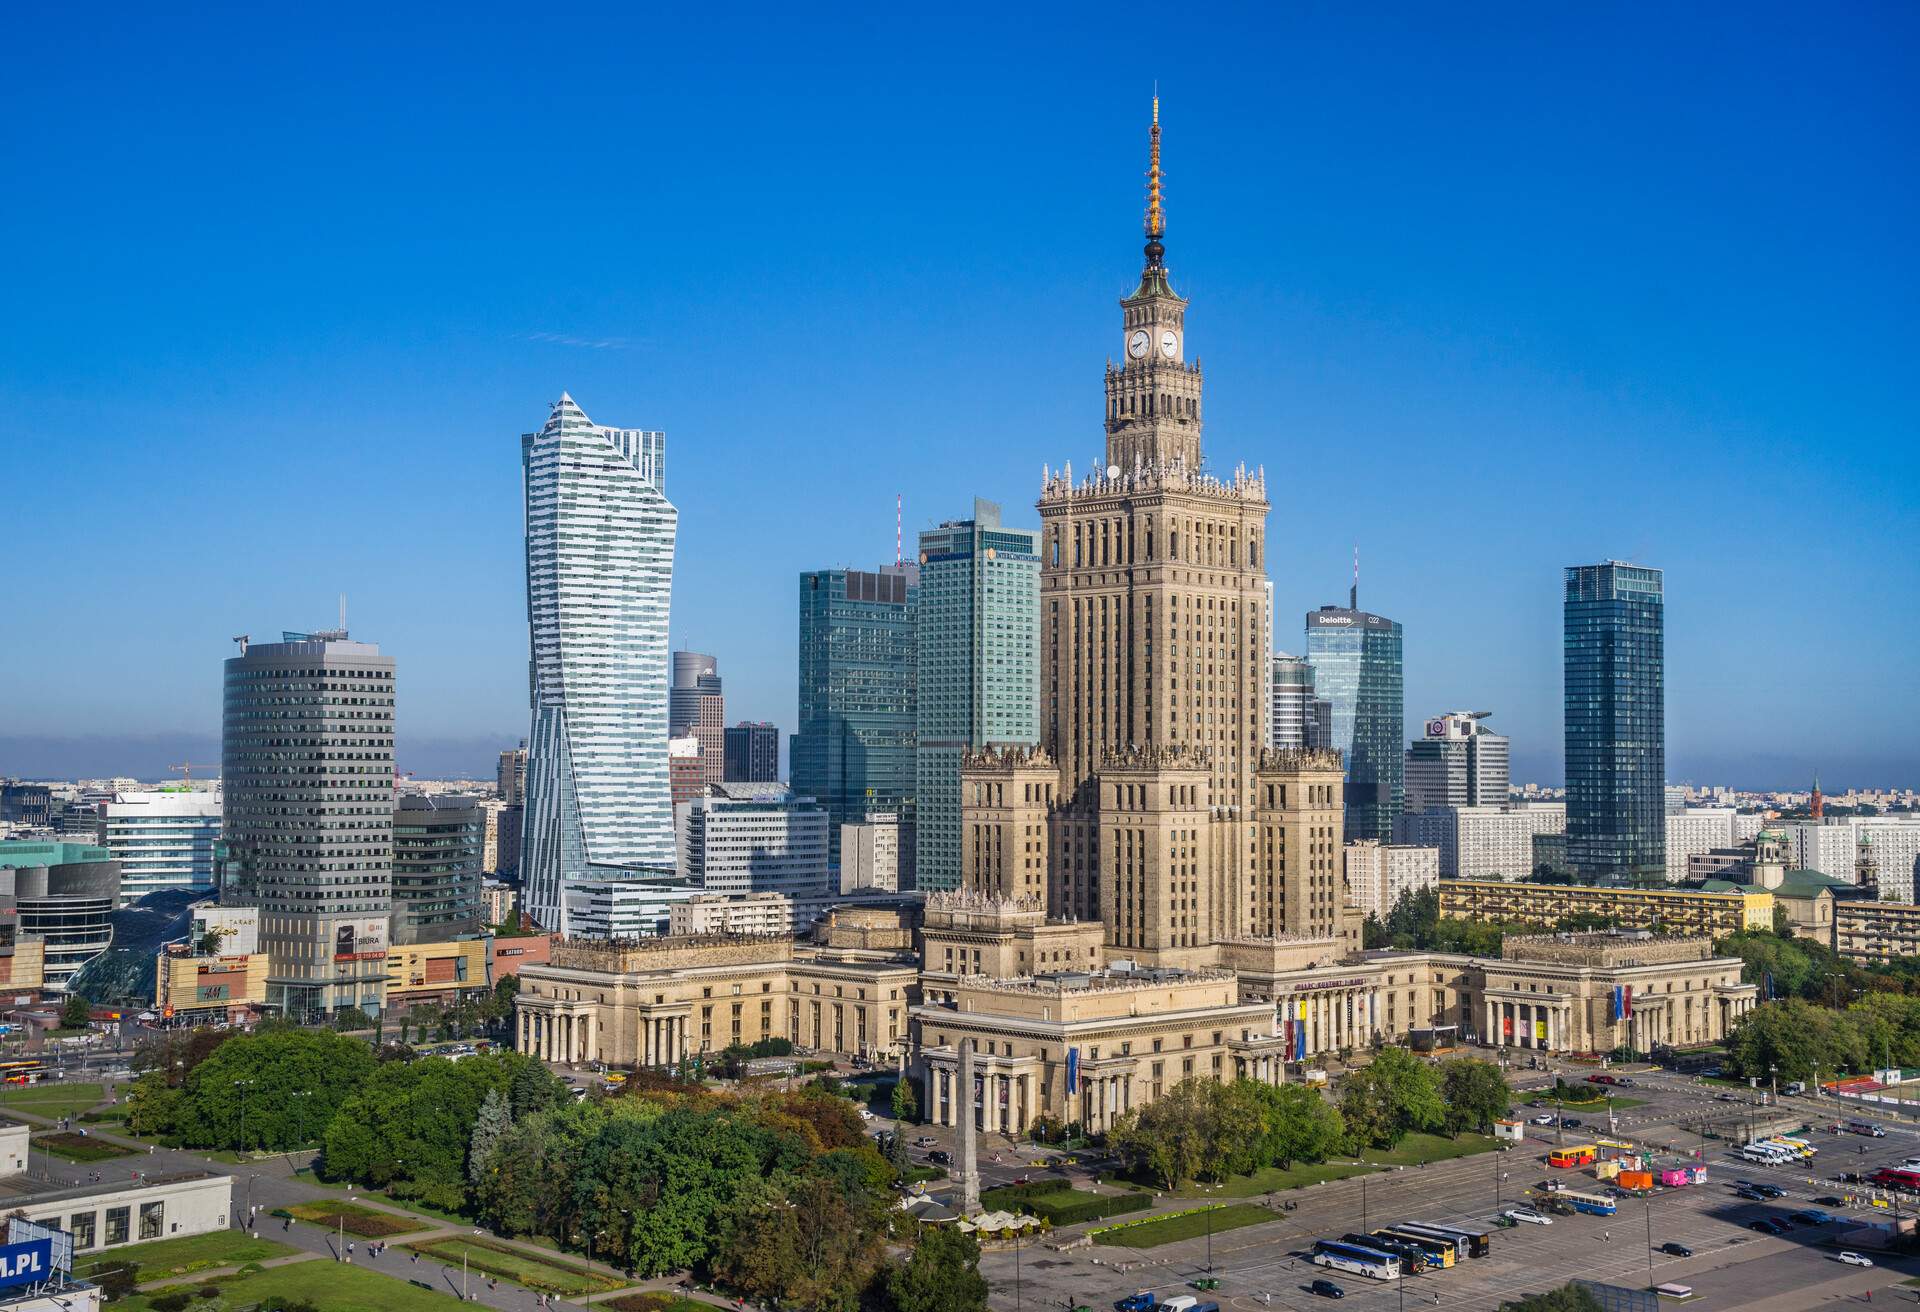 Warsaw Centrum, view of the very heart of the polish capital, with the Zota 44 skyscraper and the Russian Weding Cake style soc-realist Palace of Culture and Science amongst other Warsaw highrise, Warsaw, Poland